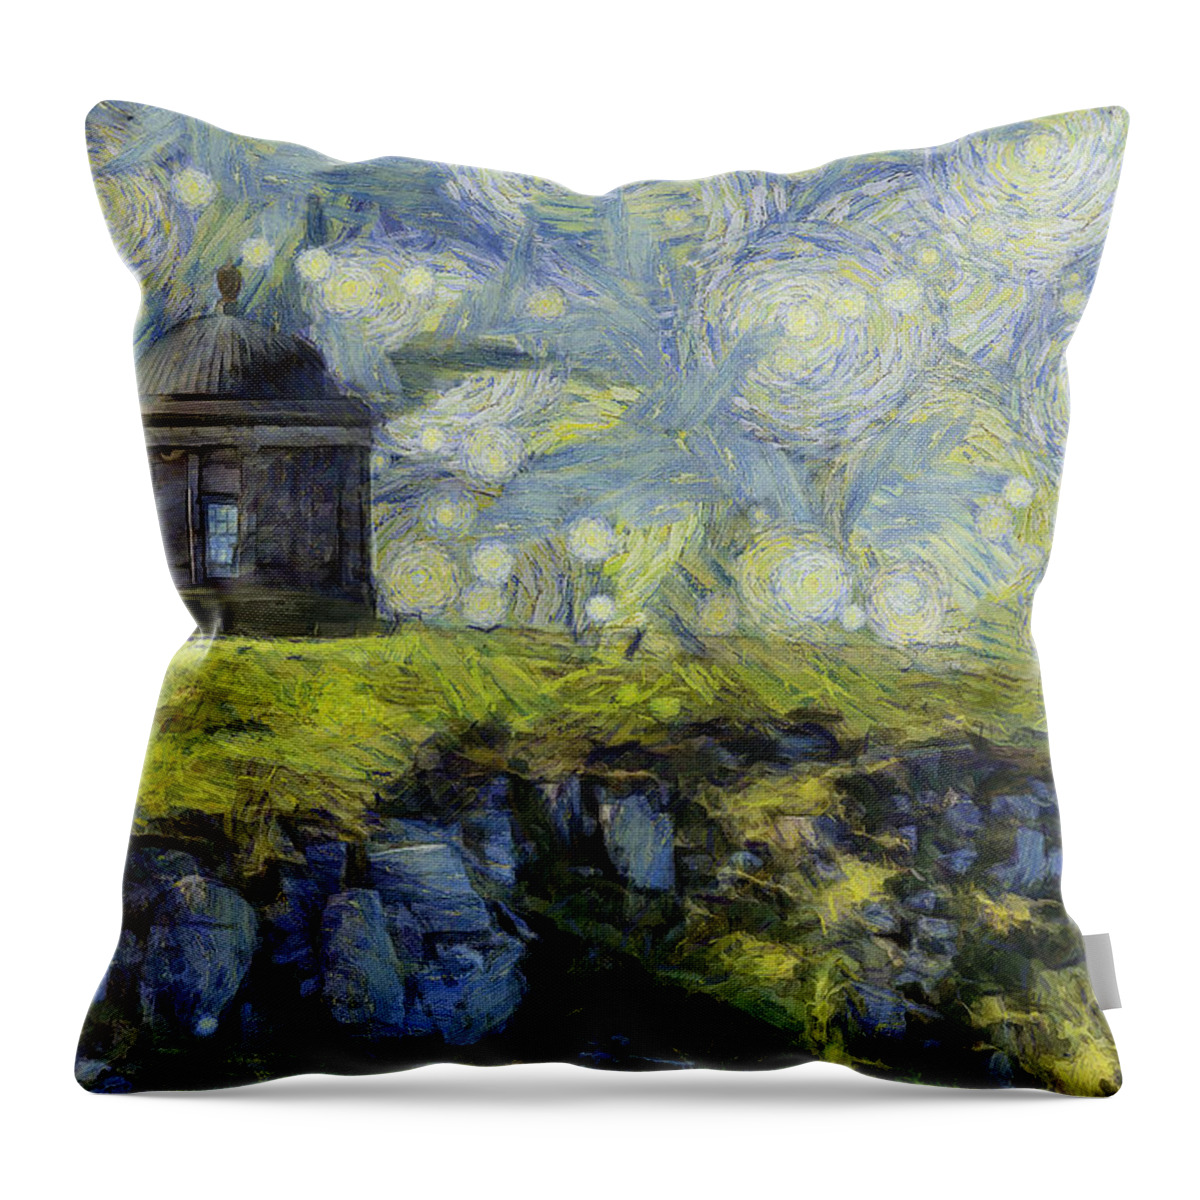 Ireland Throw Pillow featuring the photograph Starry Mussenden Temple by Nigel R Bell